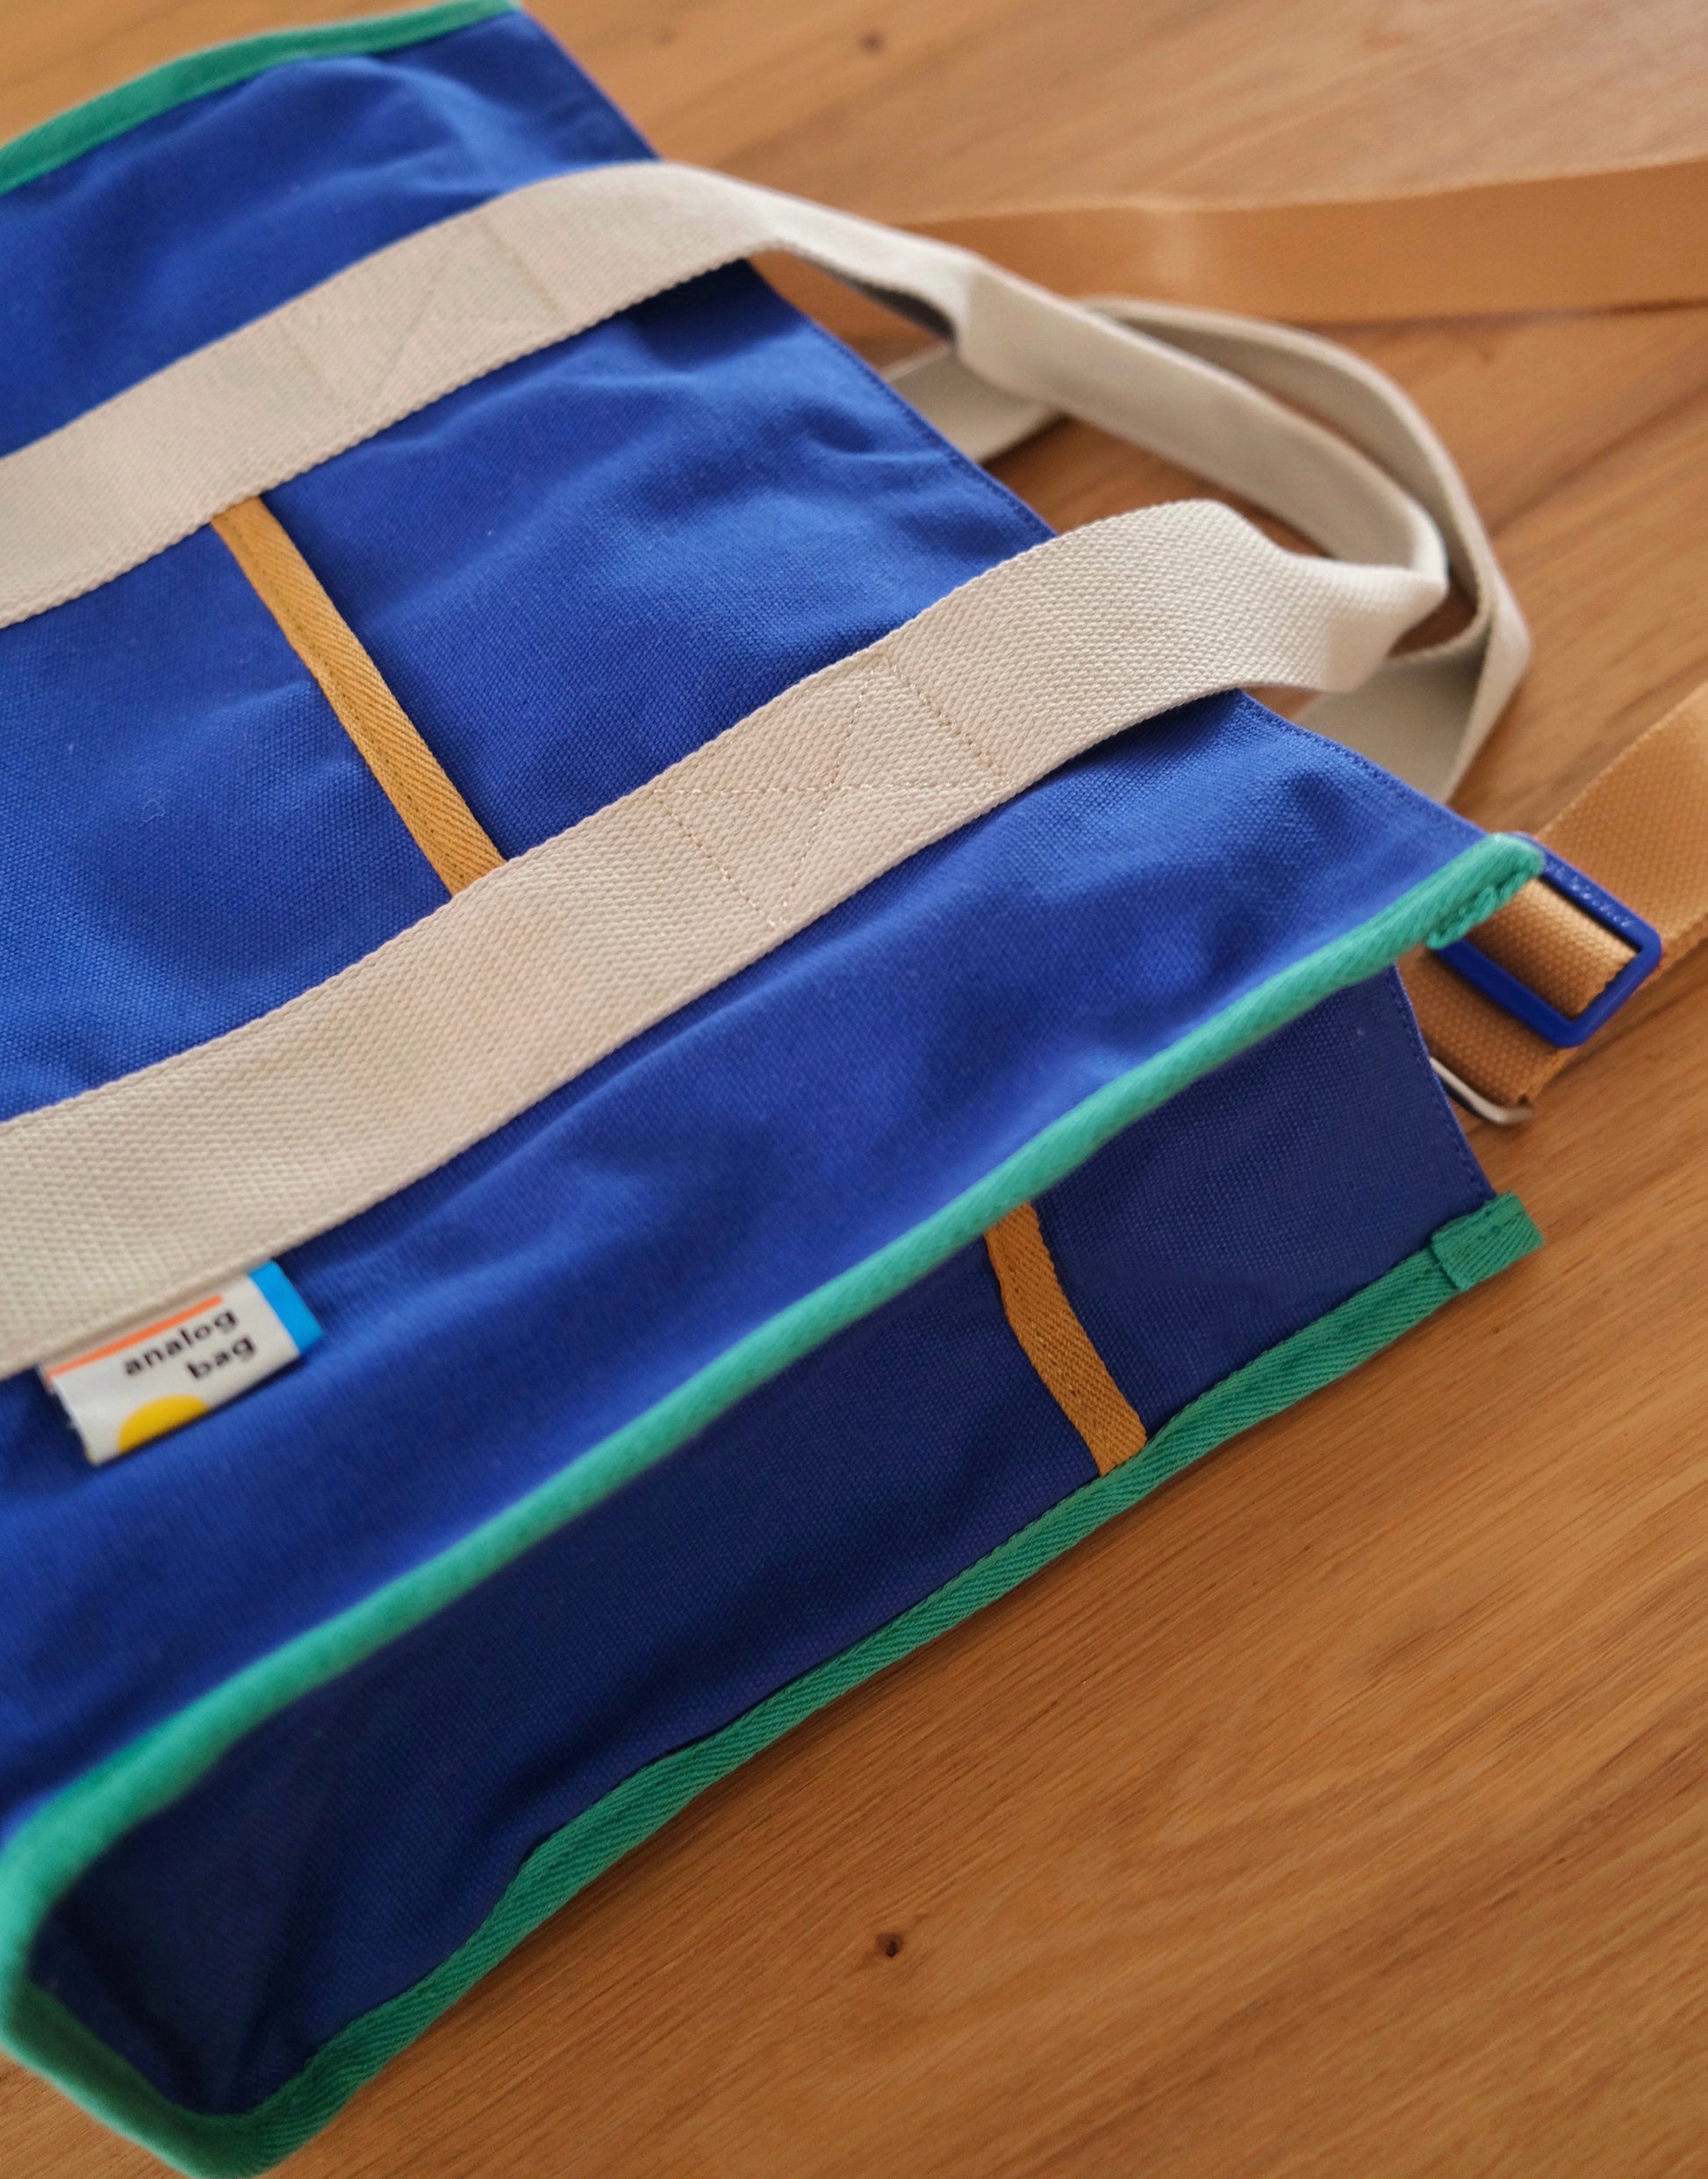 Limited Preorder: Analog No.5 Laptop Tote (Water Repellent).